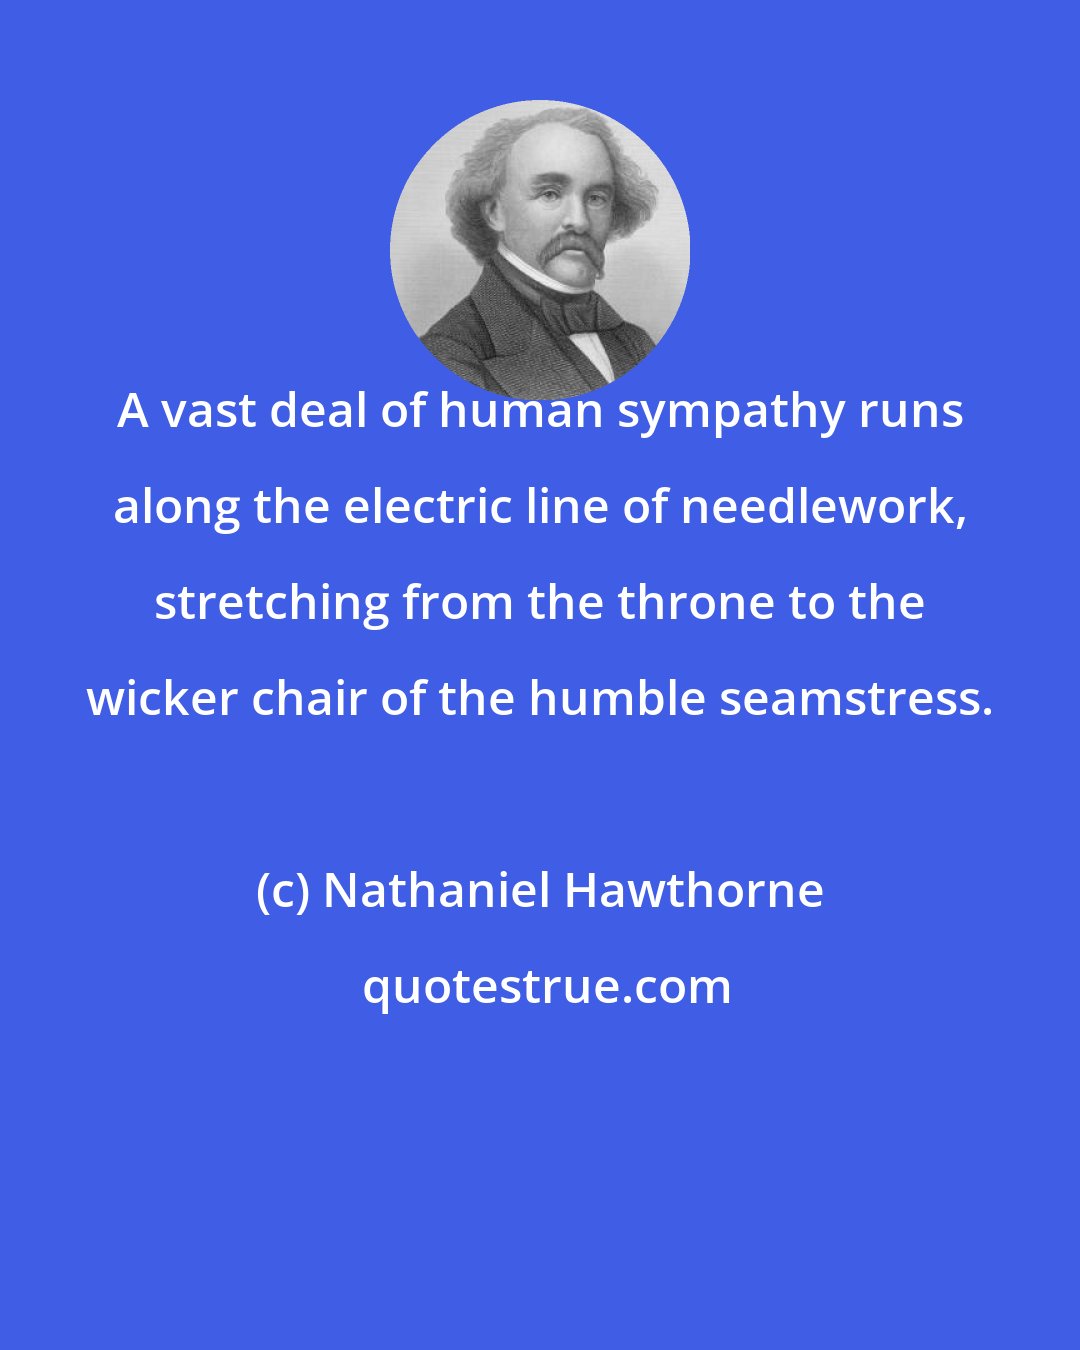 Nathaniel Hawthorne: A vast deal of human sympathy runs along the electric line of needlework, stretching from the throne to the wicker chair of the humble seamstress.